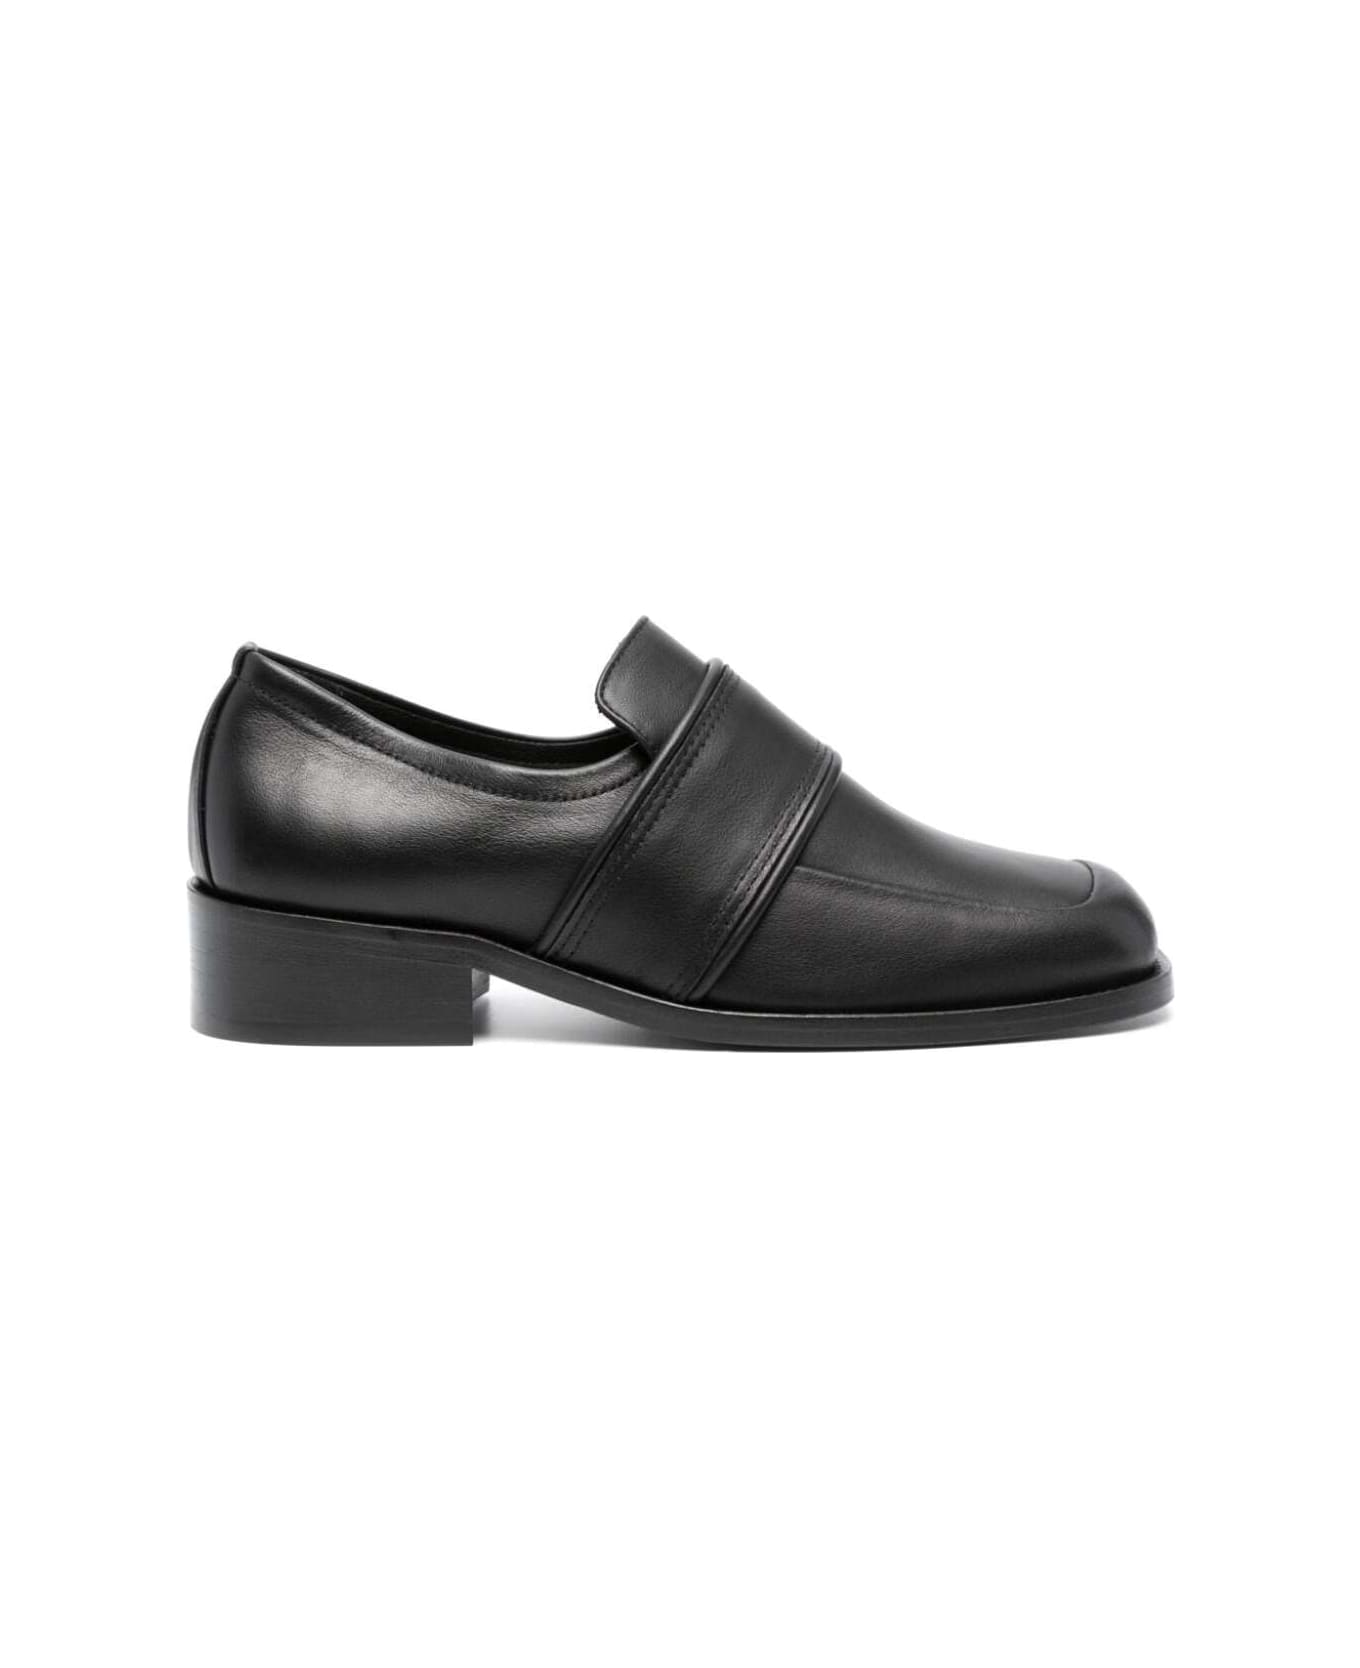 BY FAR Cyril Black Nappa Leather - Black フラットシューズ